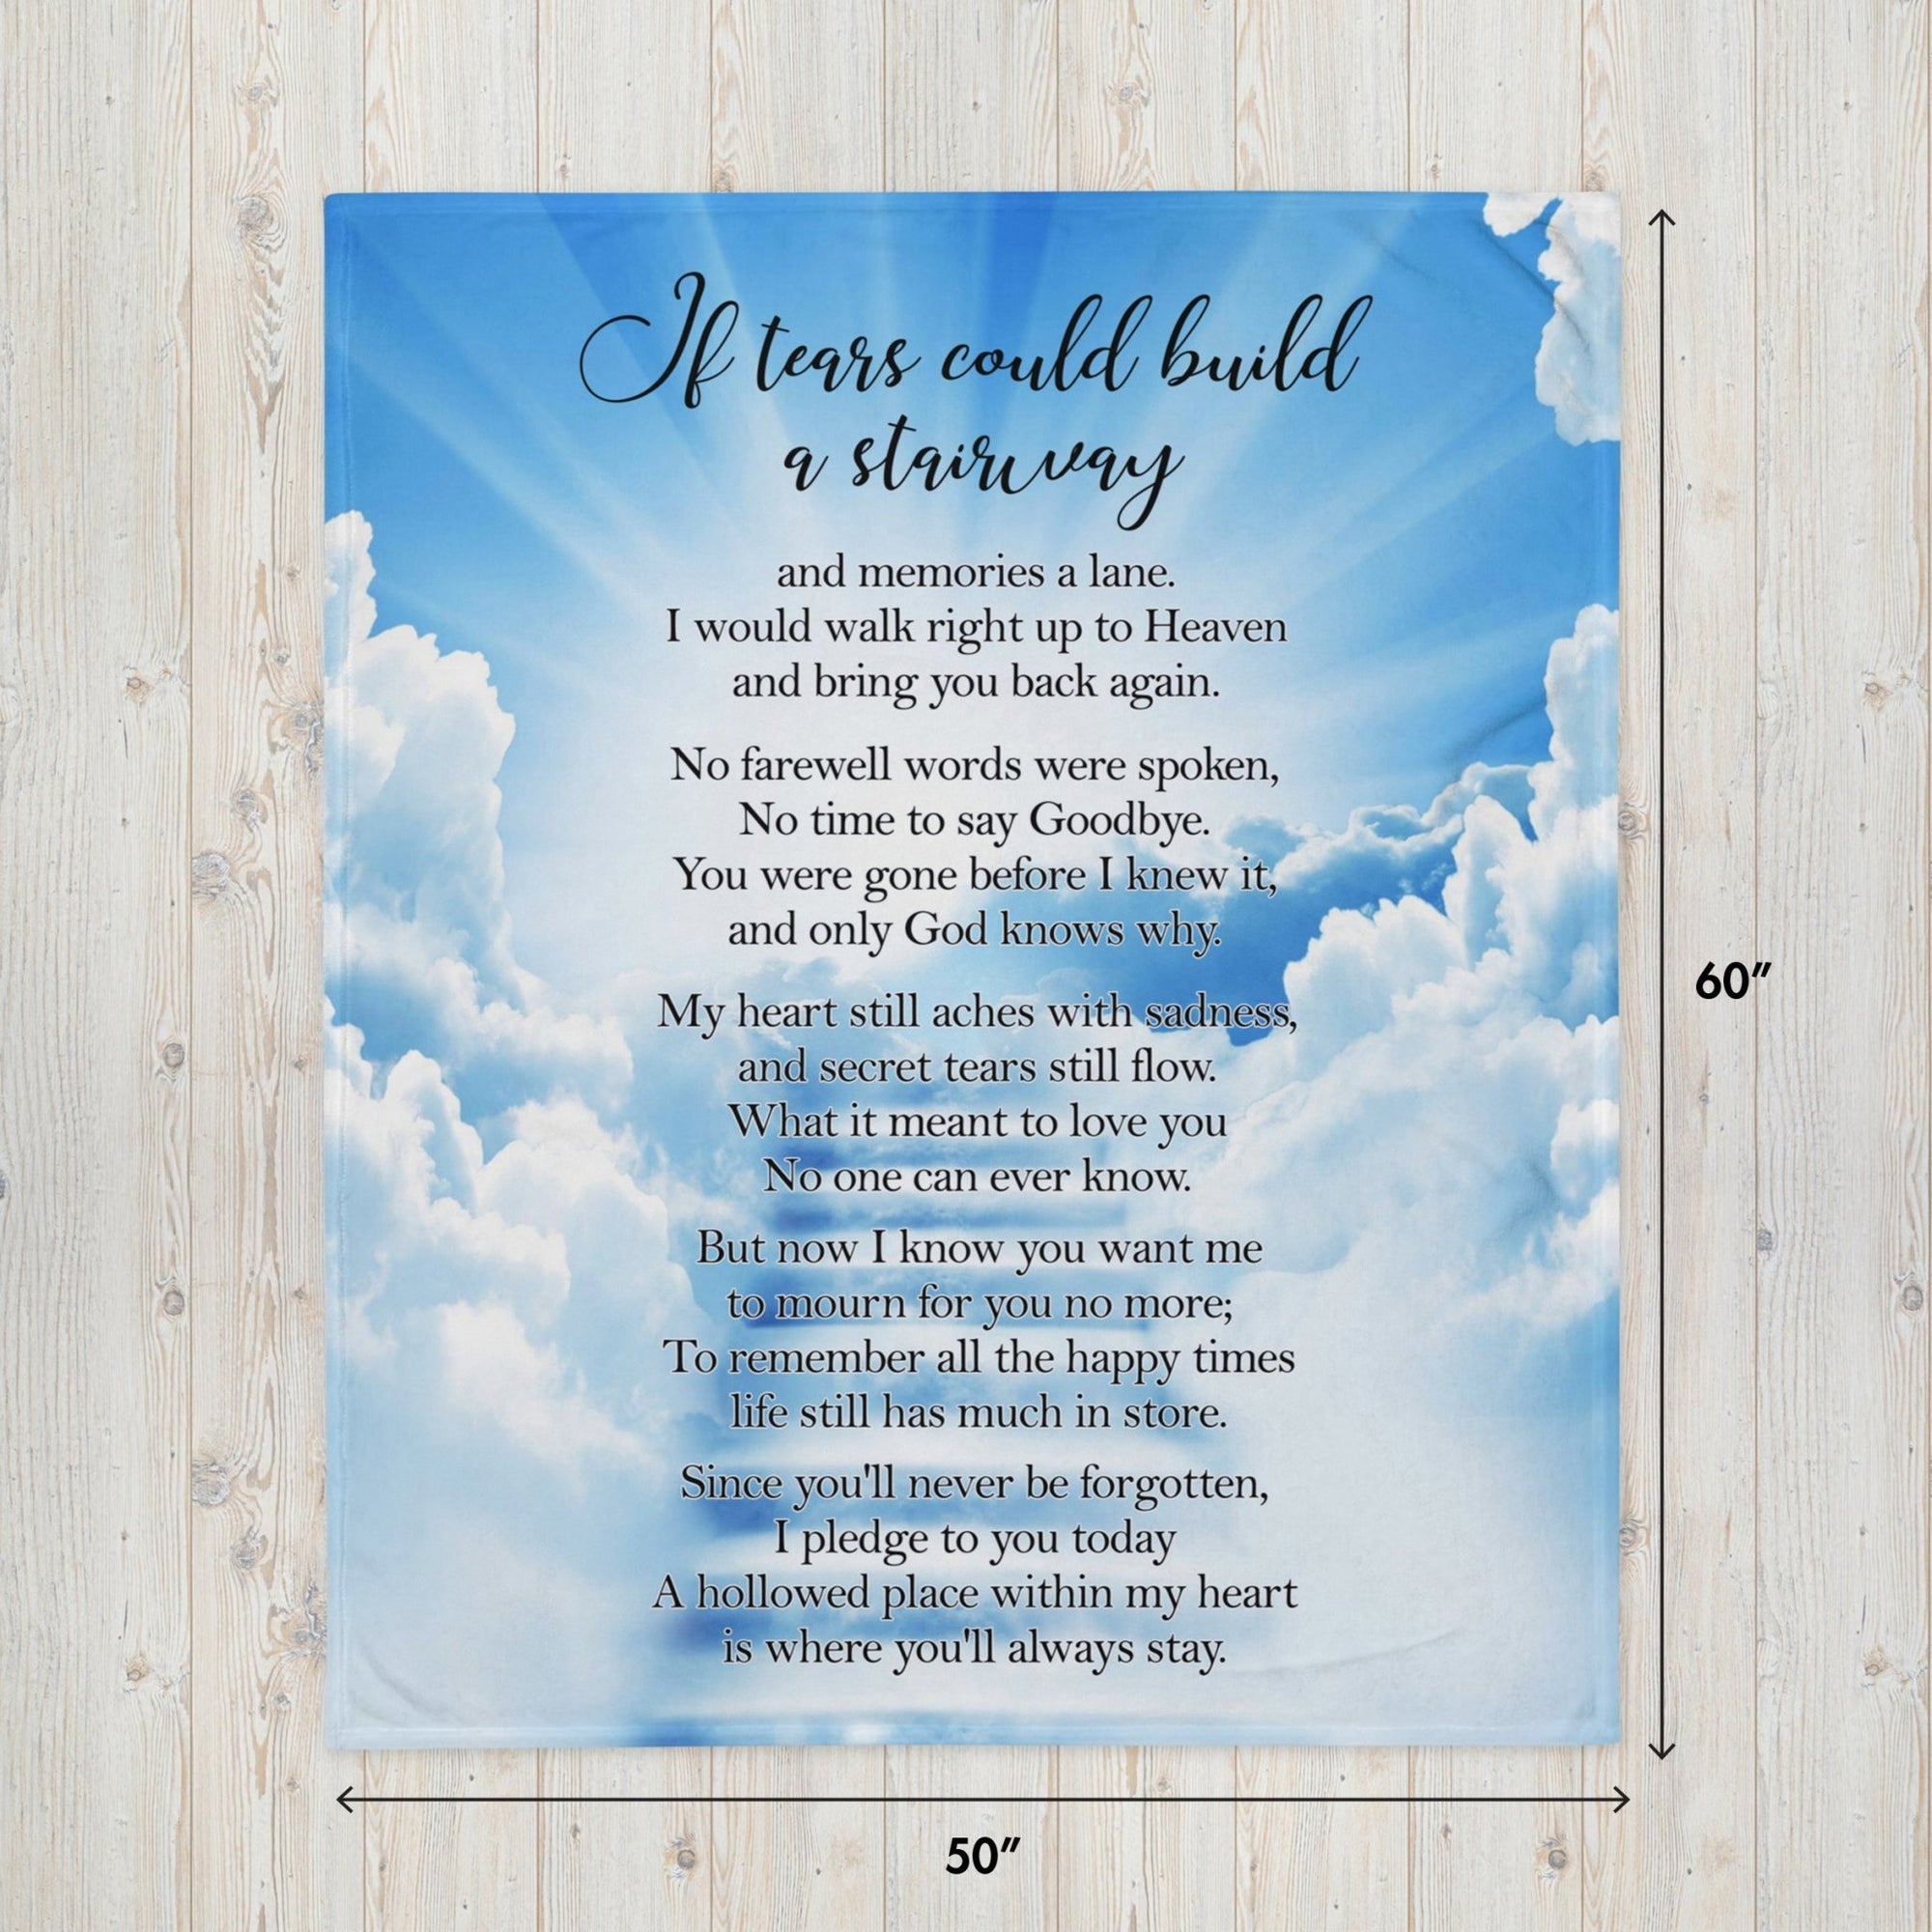 Memorial Decorative Throw Pillow Sympathy Gift & Home Décor Idea - If Tears Could Build a Stairway to Heaven (Heaven)